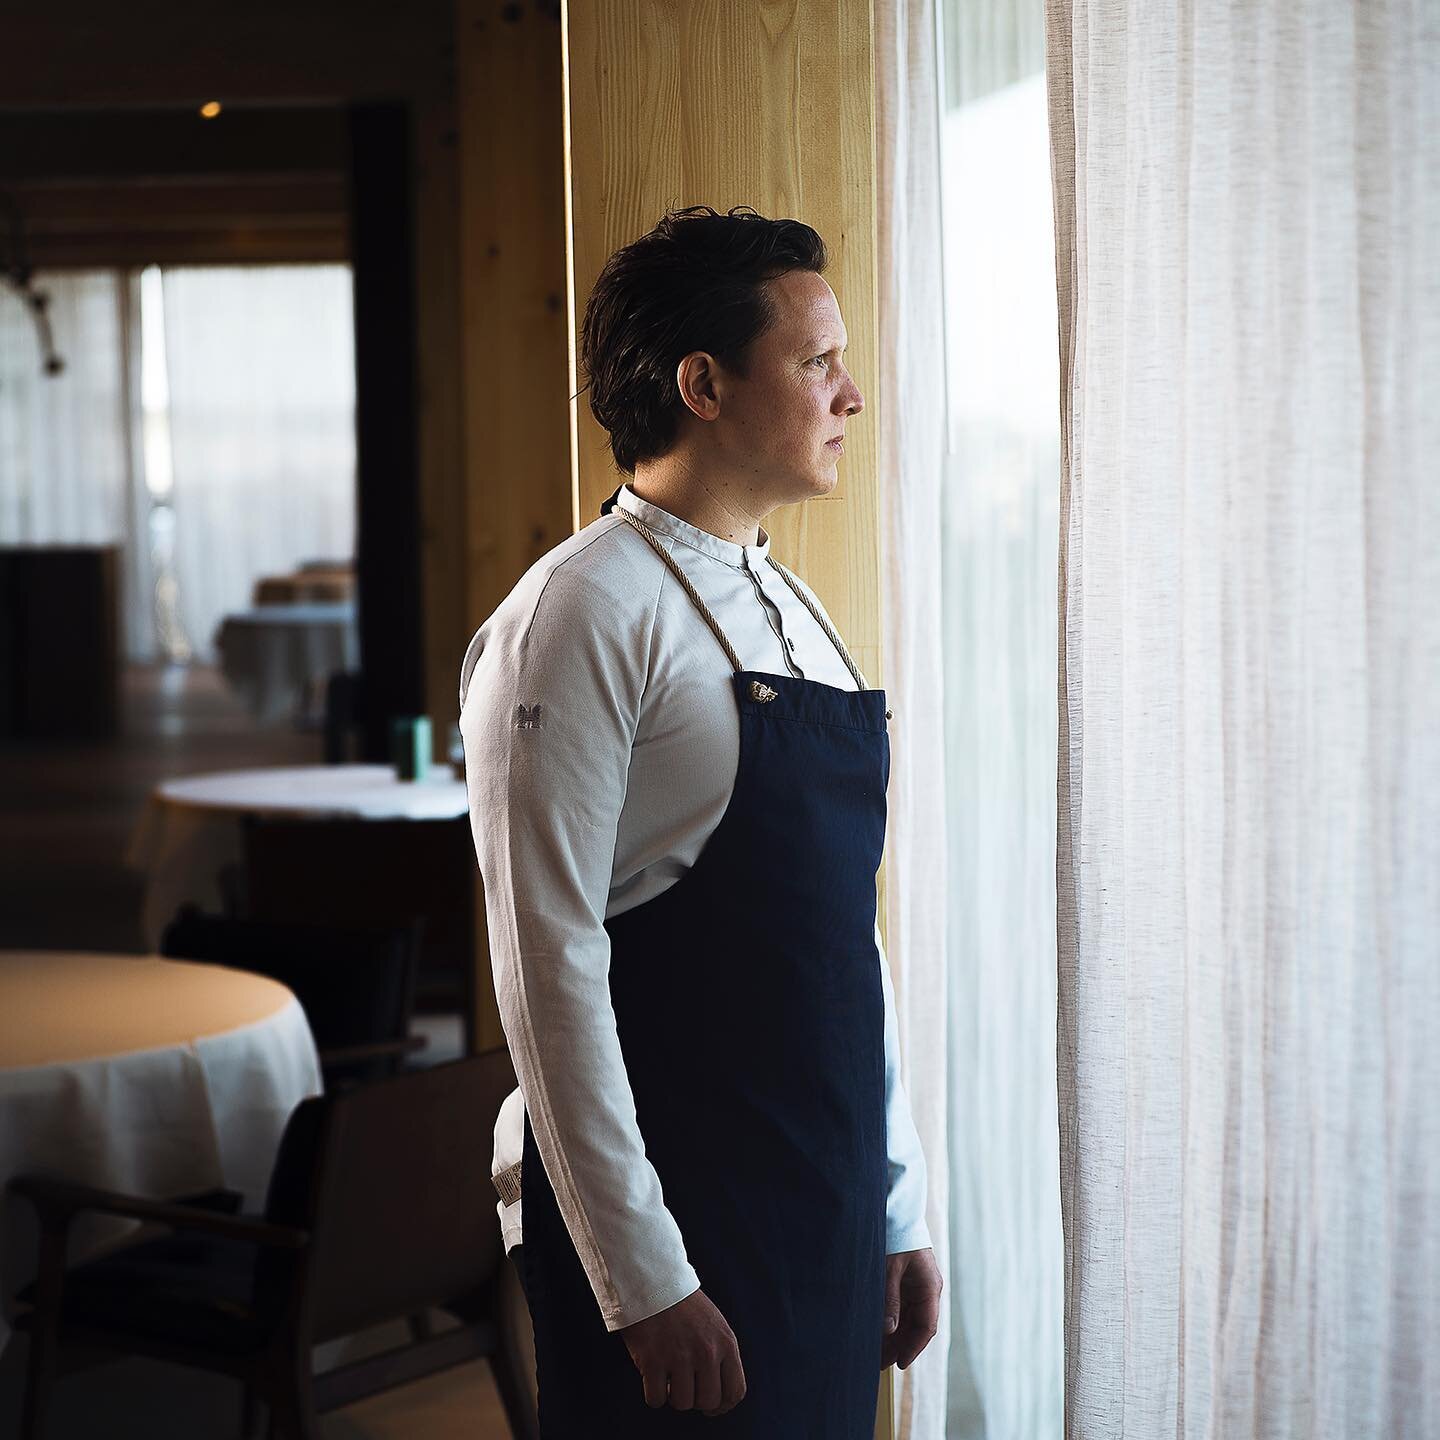 **chef Syrco Bakker from restaurant pure c shot for culinair ambiance 
Find the whole story in the May number. 
-
-
-
#syrcobakker #restopurec #sergioherman #michelin #michelinstar #strandhotelcadzandbad #foodphotographer #hasselbladx1d @syrcobakker 